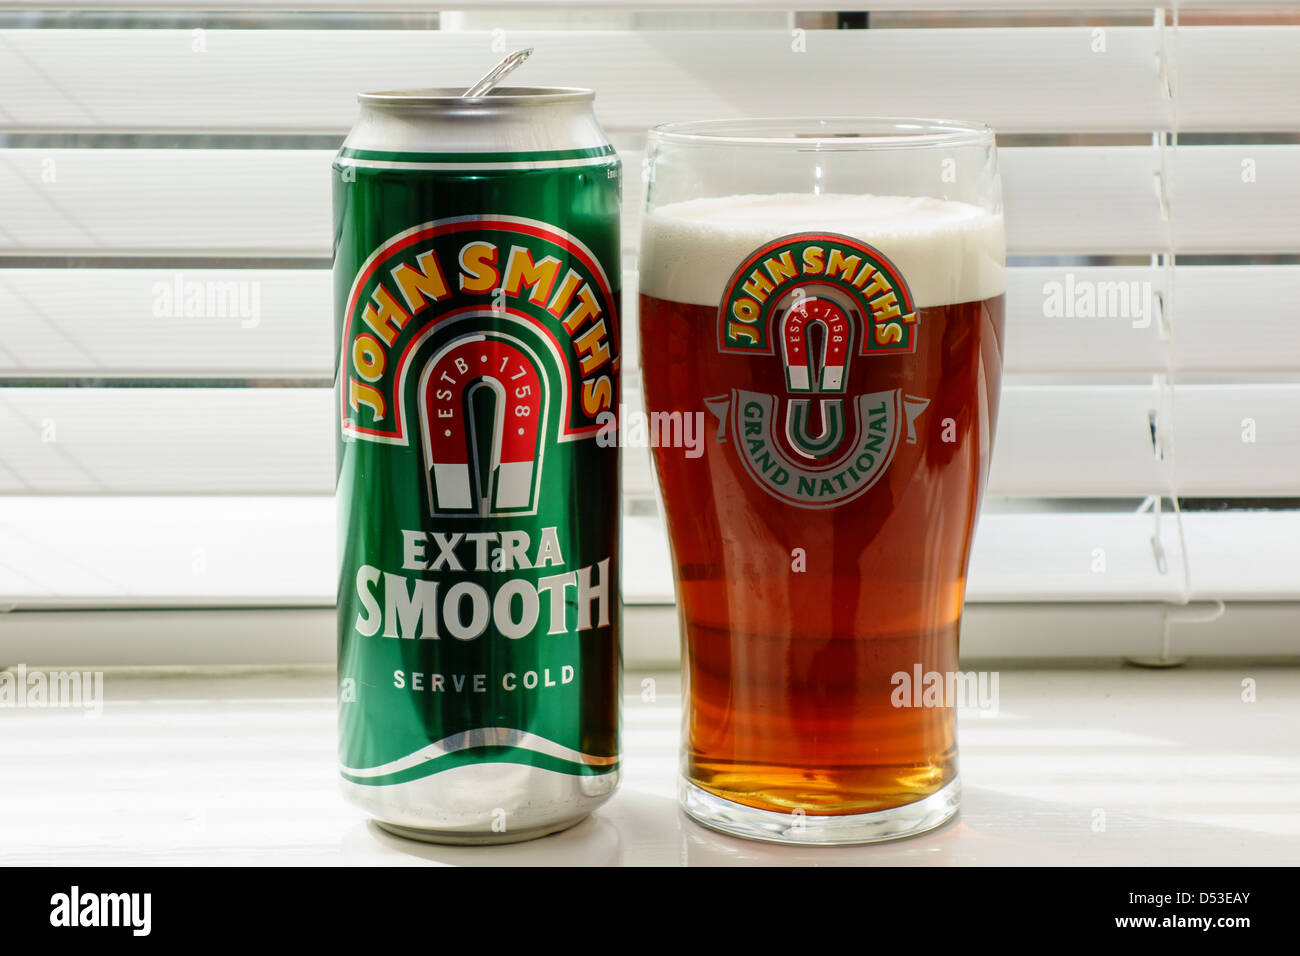 John Smiths Extra Smooth Pint of Beer Ale Stock Photo